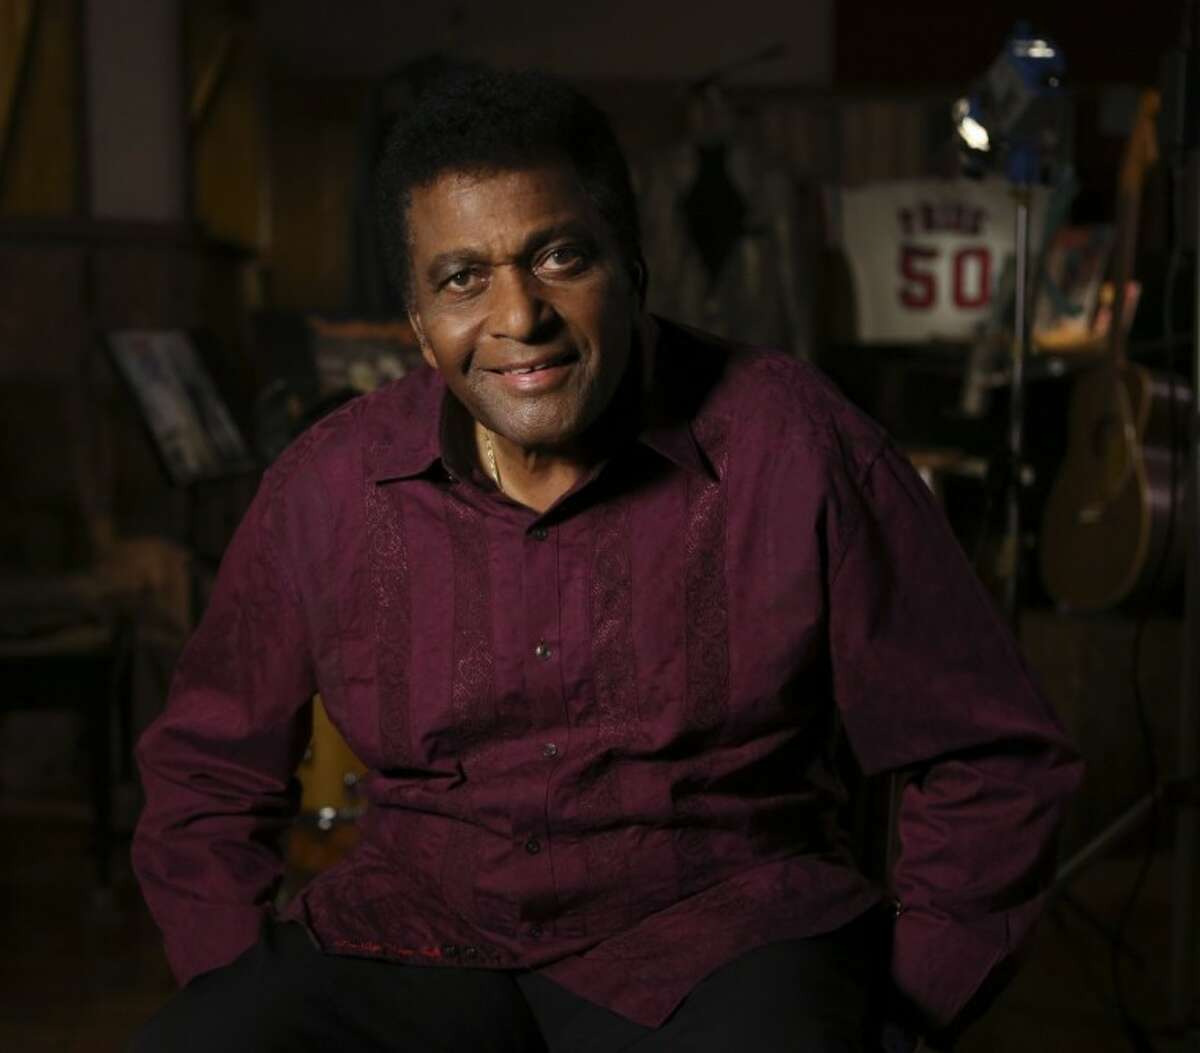 Country music legend Charley Pride smiles for a portrait at his recording studio in Dallas Monday. The Smithsonian has selected Pride to be part of the new National Museum of African American History and Culture opening in 2015 with Pride giving the museum items from his life.